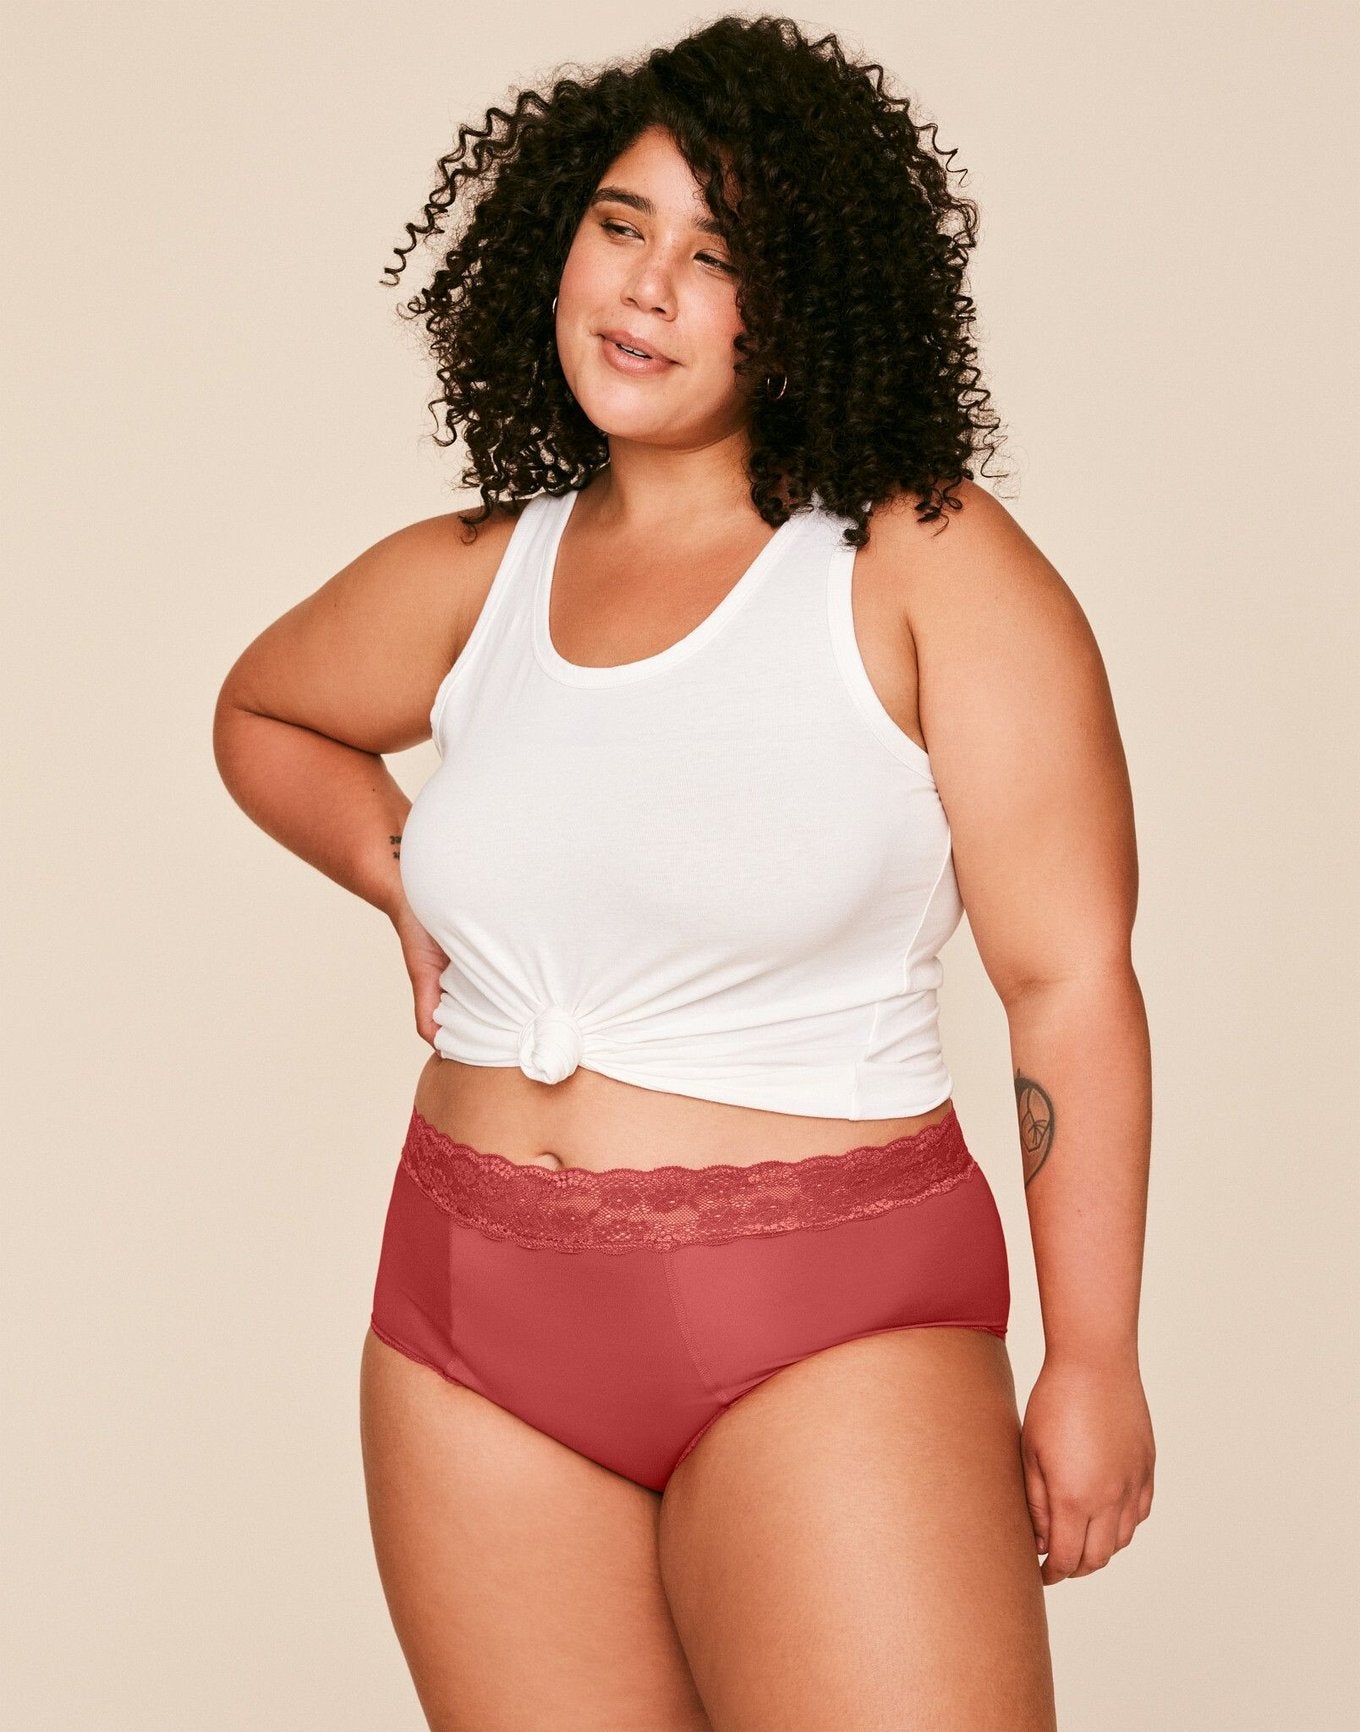 Joyja Amelia period-proof panty in color Baked Apple and shape high waisted